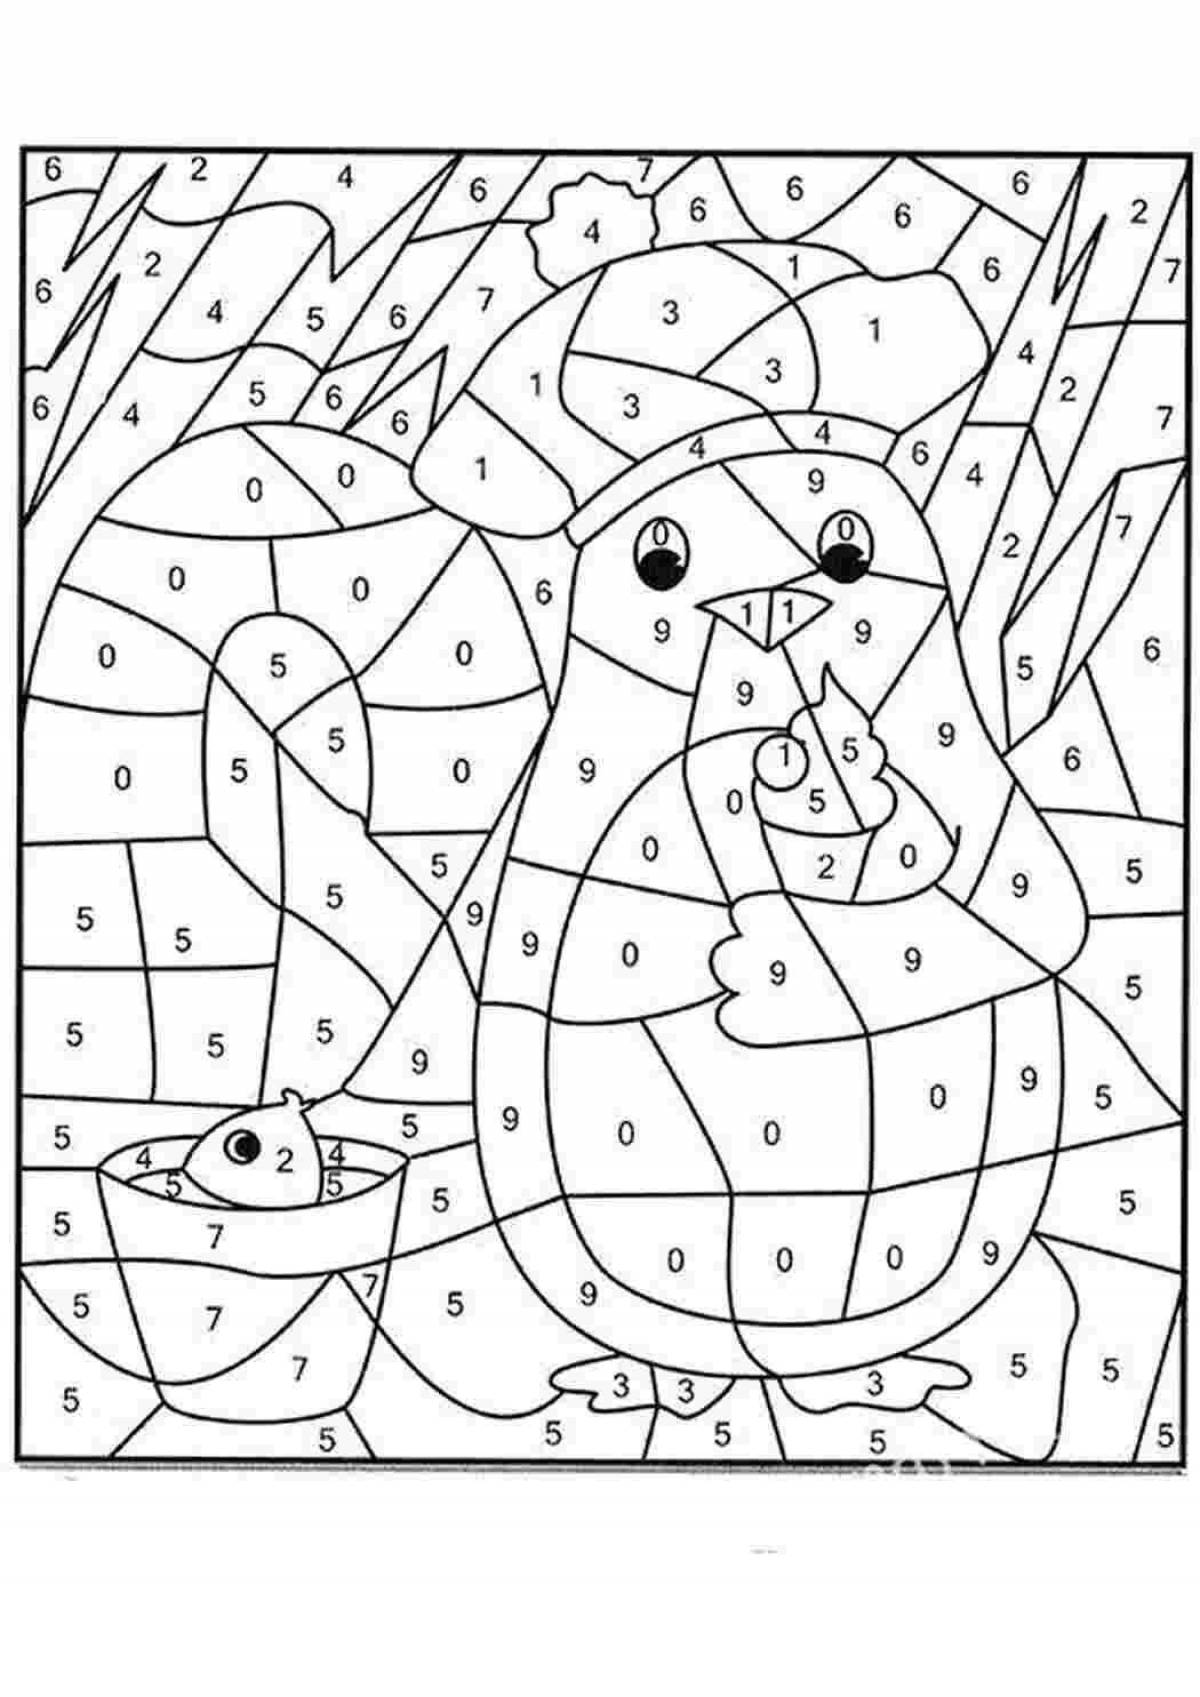 Adorable penguin by number coloring book